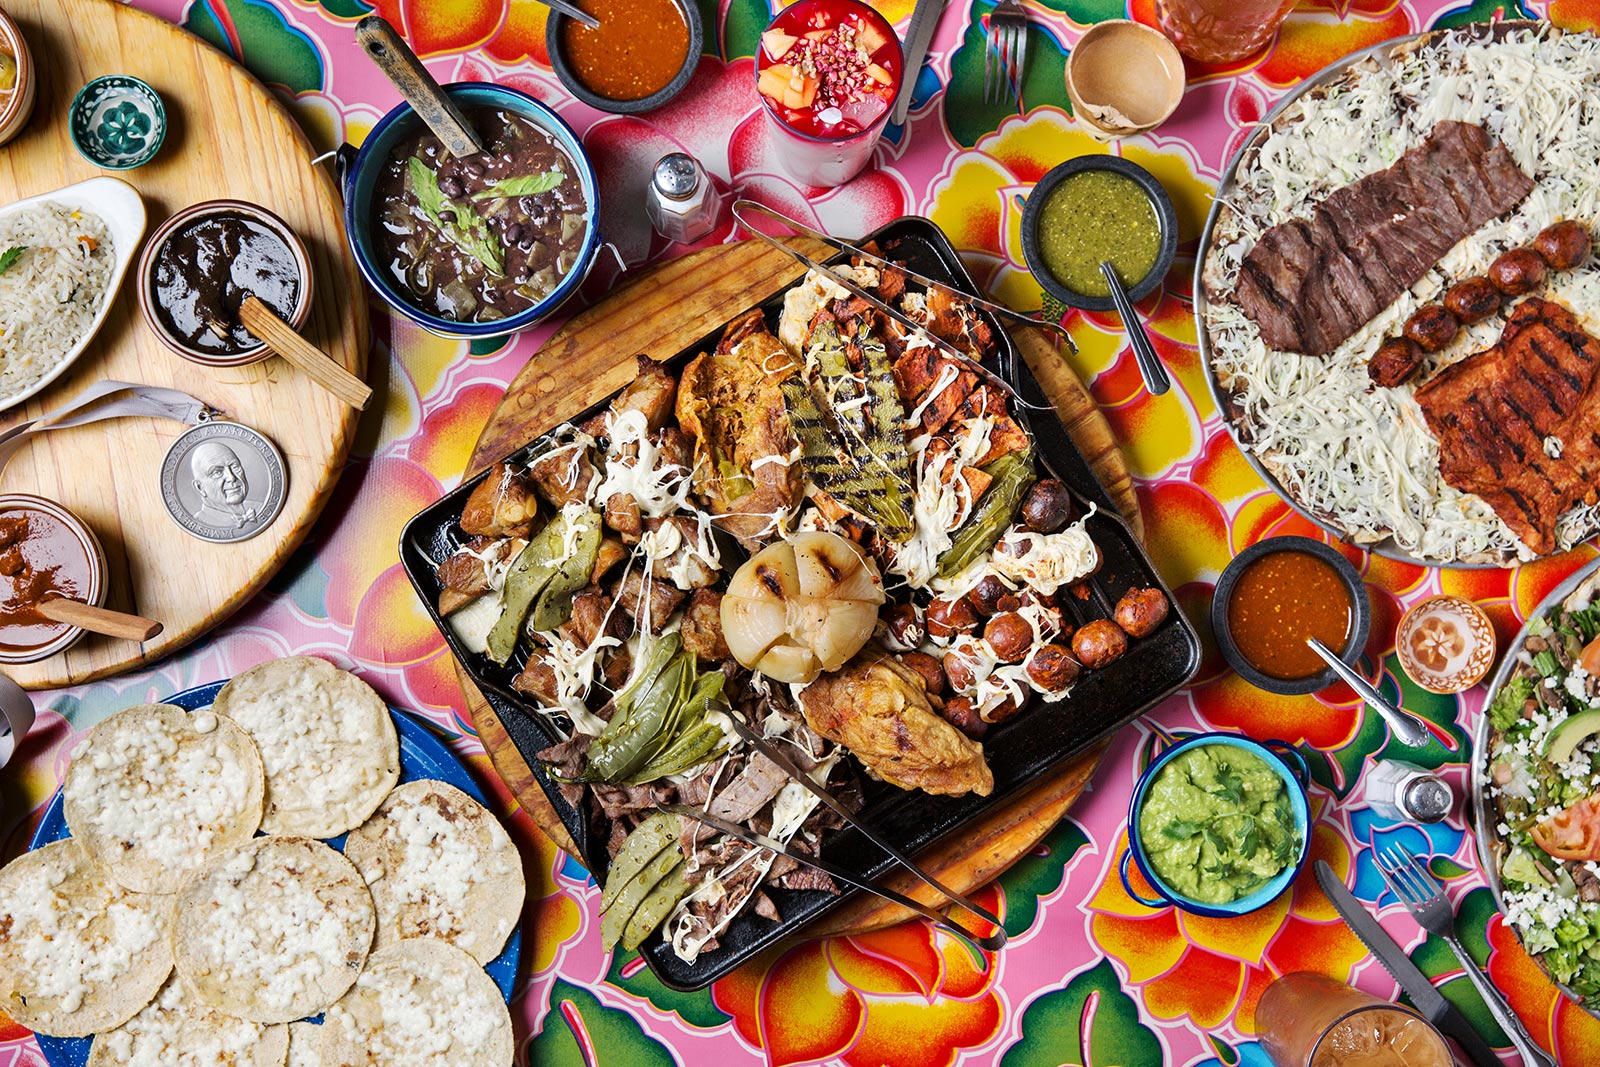 A Mexican feast at Guelaguetza. Co-owned by Bricia Lopez, Guelaguetza is a restaurant, market, and advocate of Oaxacan cuisine in Koreatown. Photo courtesy of Guelaguetza